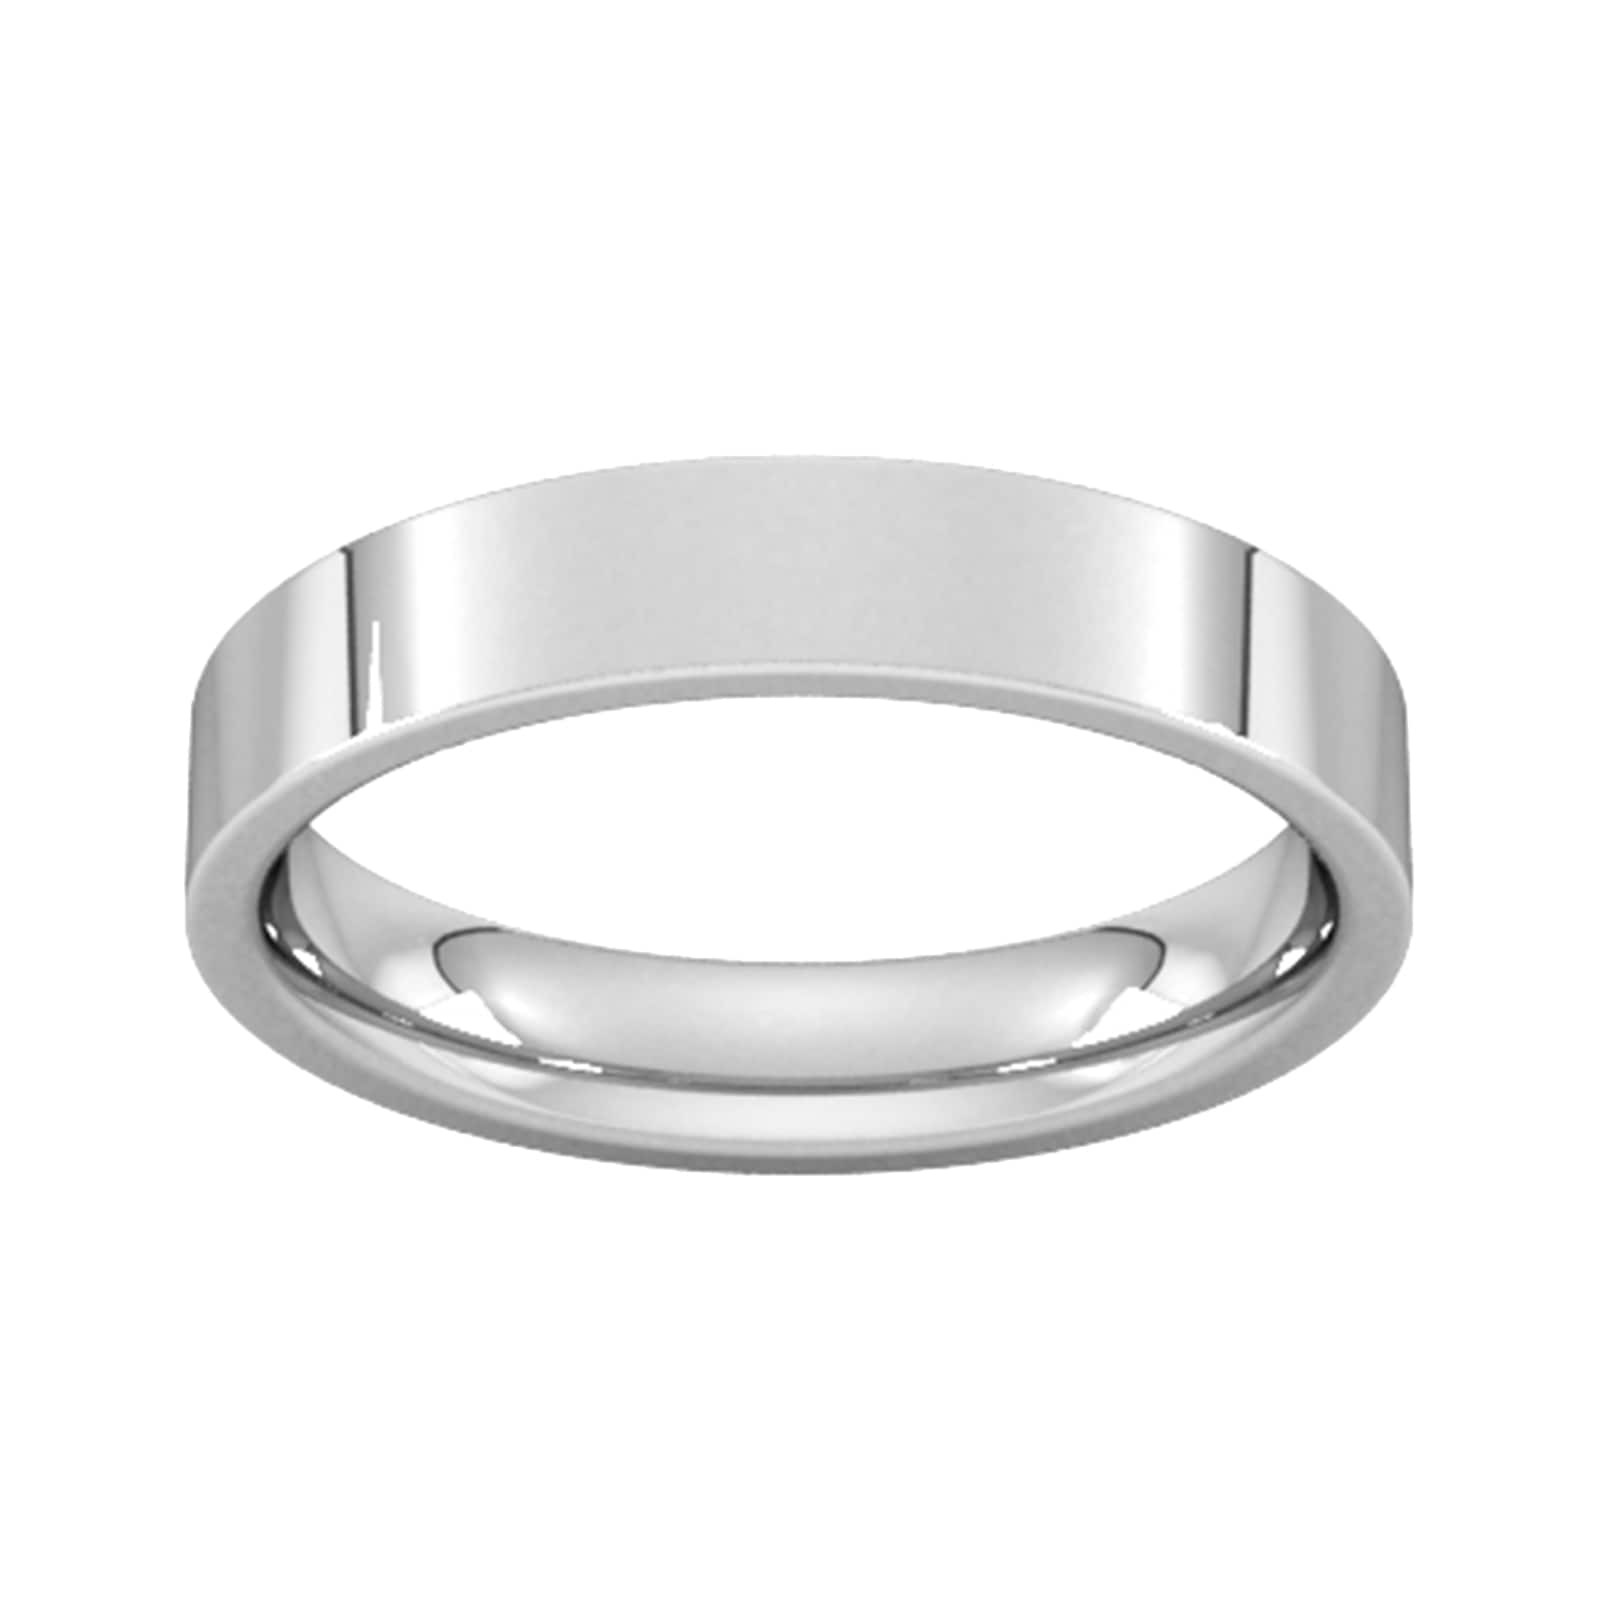 4mm Flat Court Heavy Wedding Ring In 18 Carat White Gold - Ring Size J